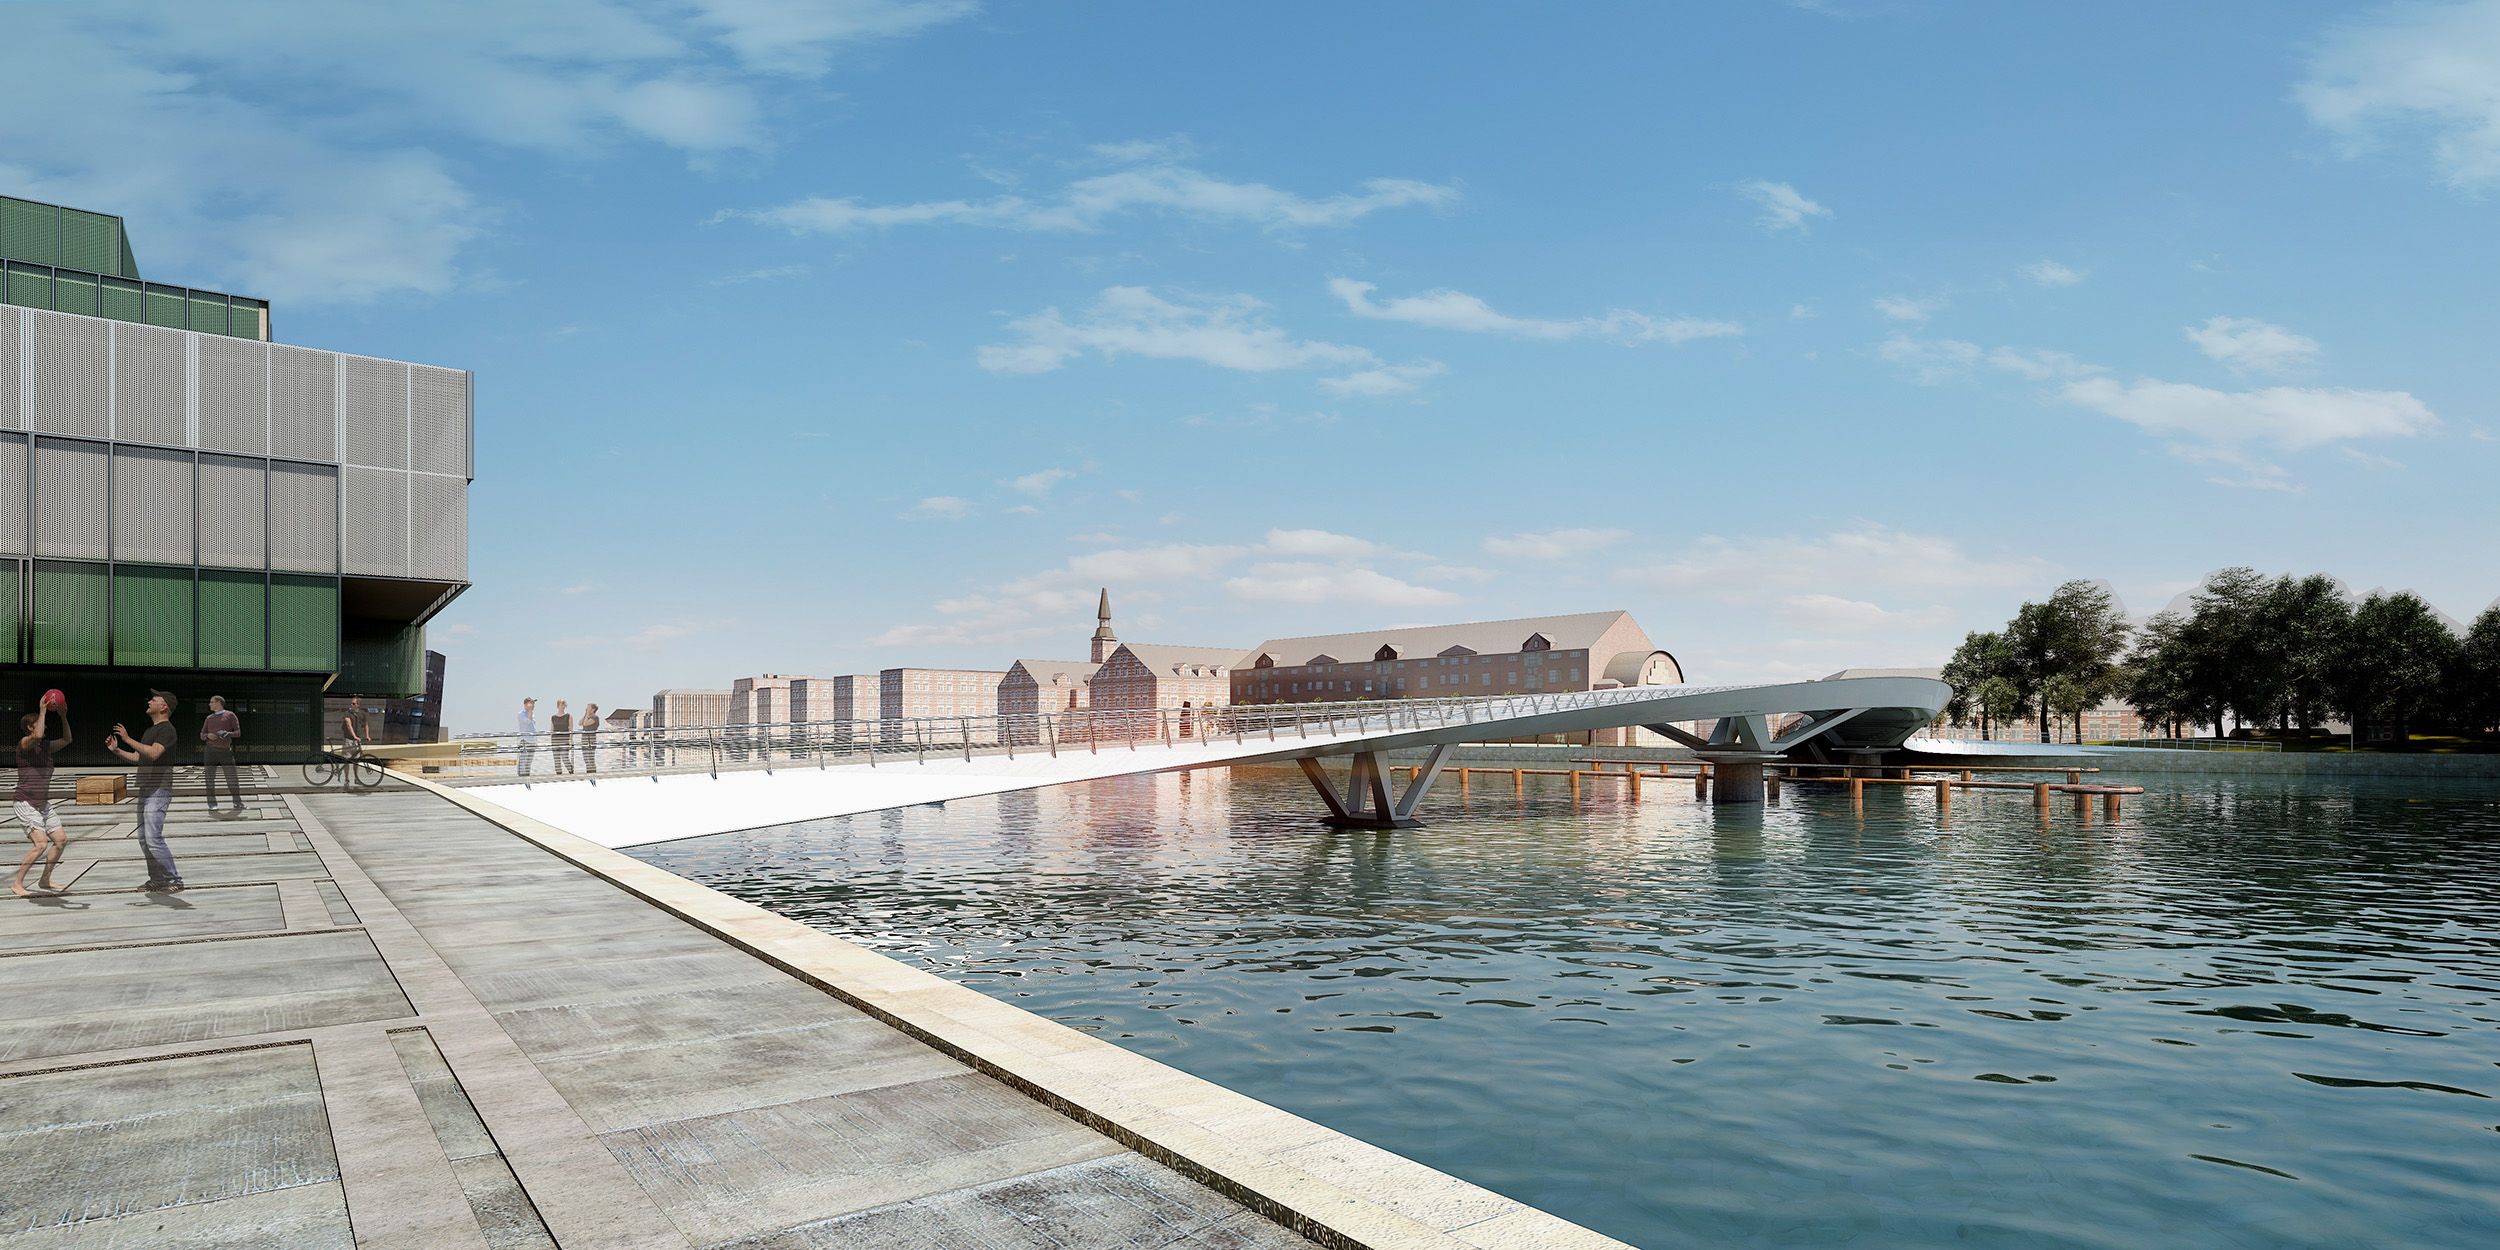 Design chosen for new Vesterbro-Amager foot and cycle bridge